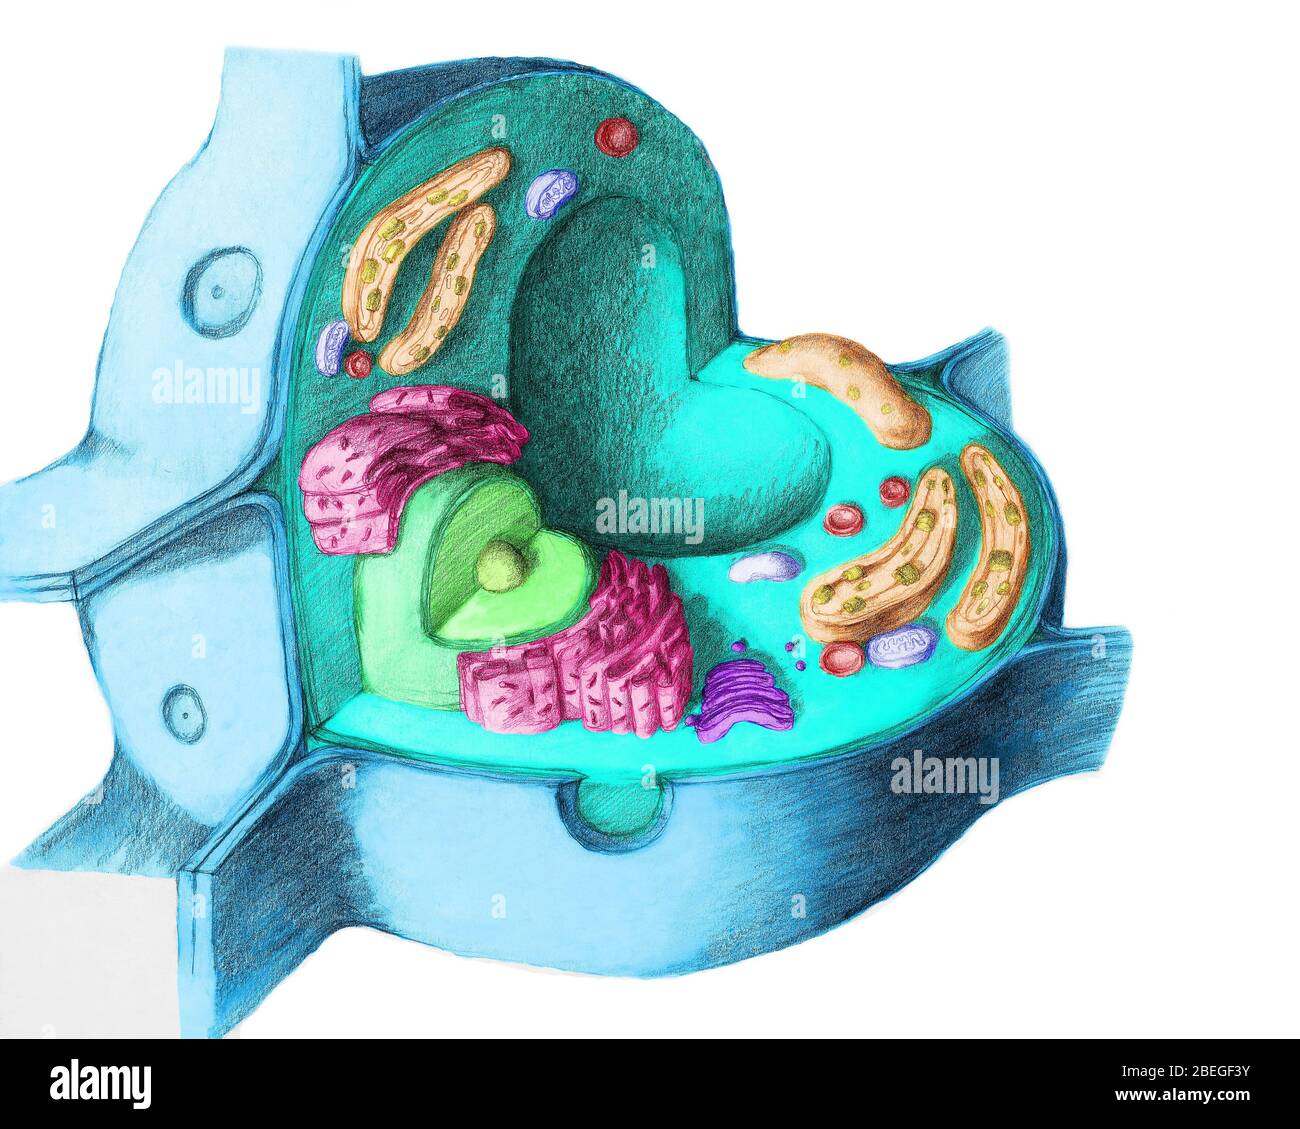 Plant Cell Stock Photo